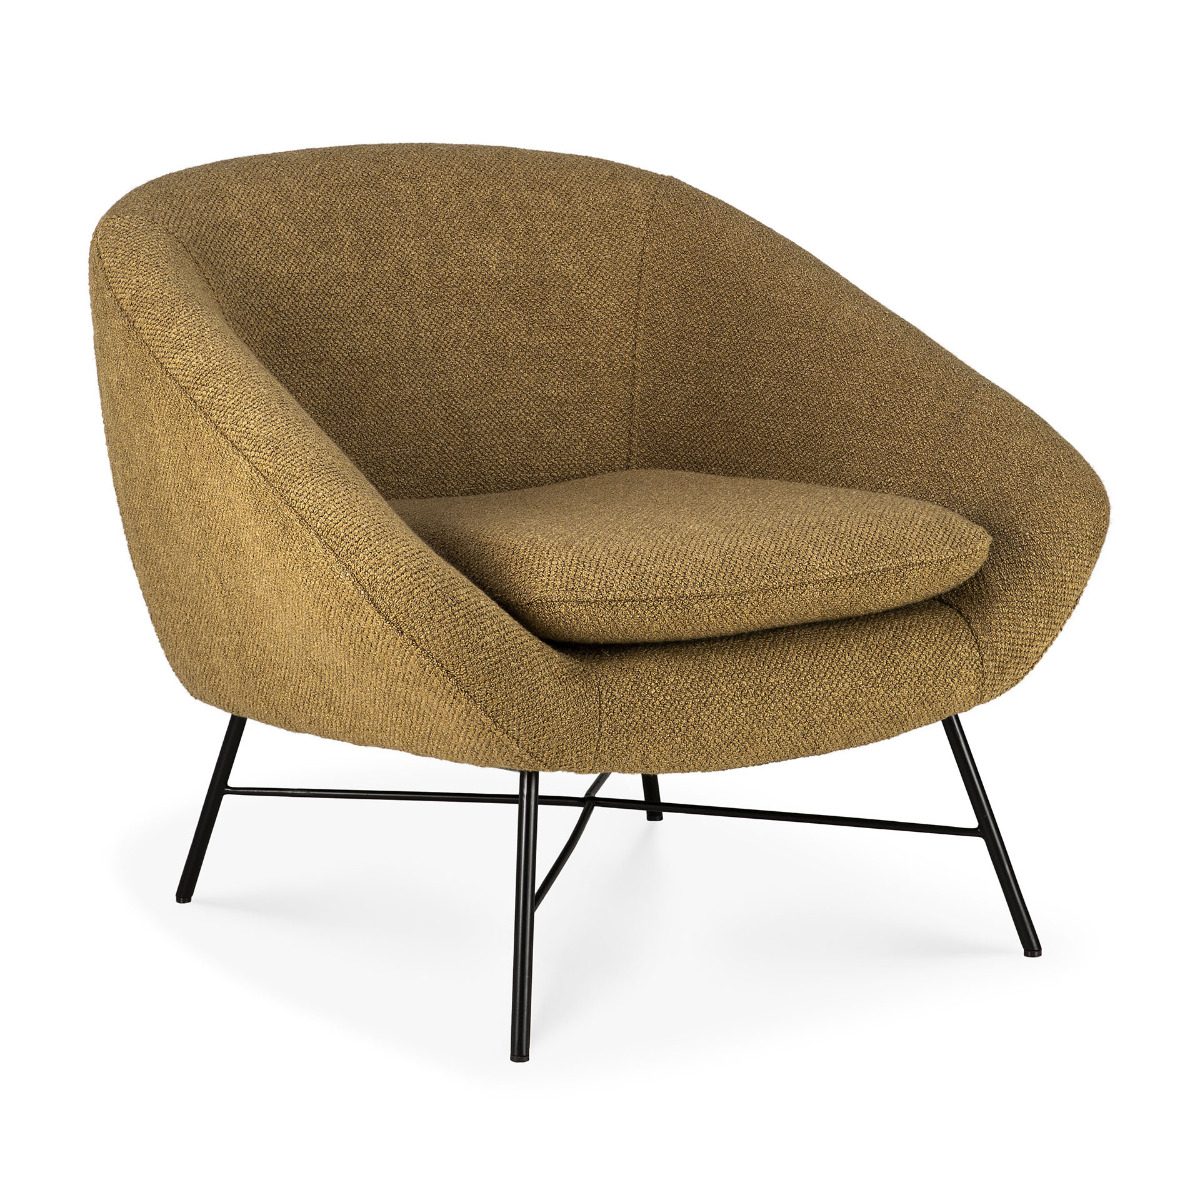 Barrow lounge chair in ginger